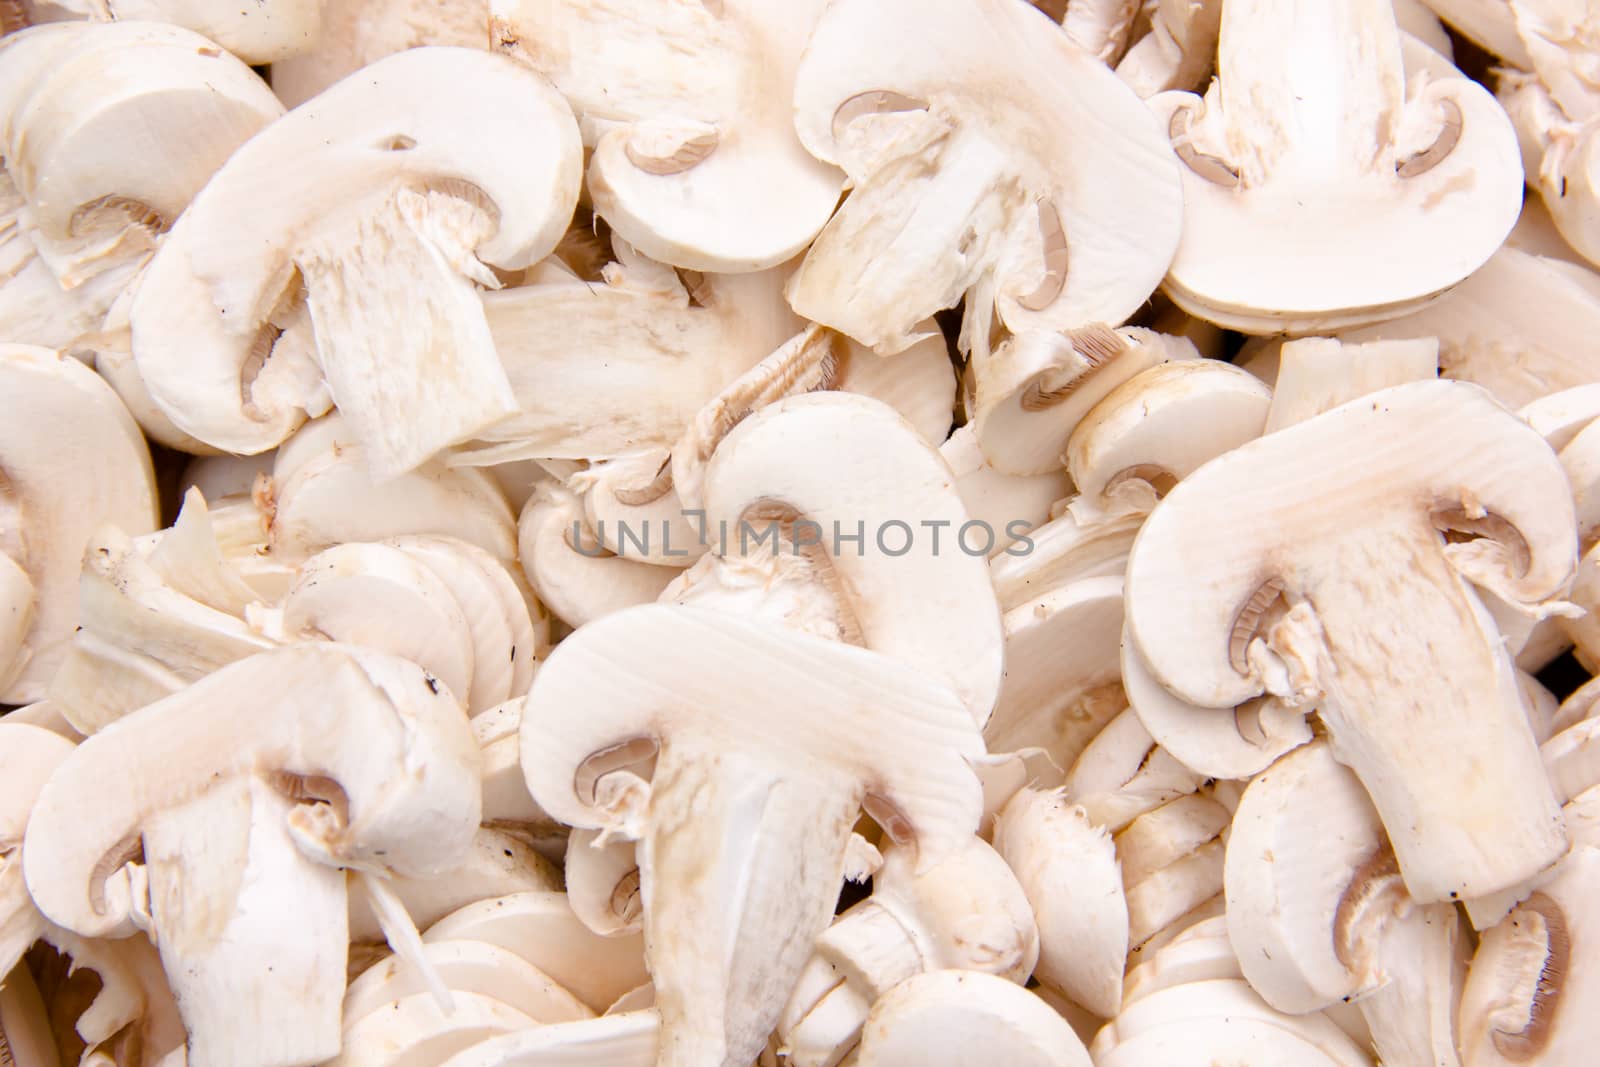 Sliced mushrooms seen up close by spafra